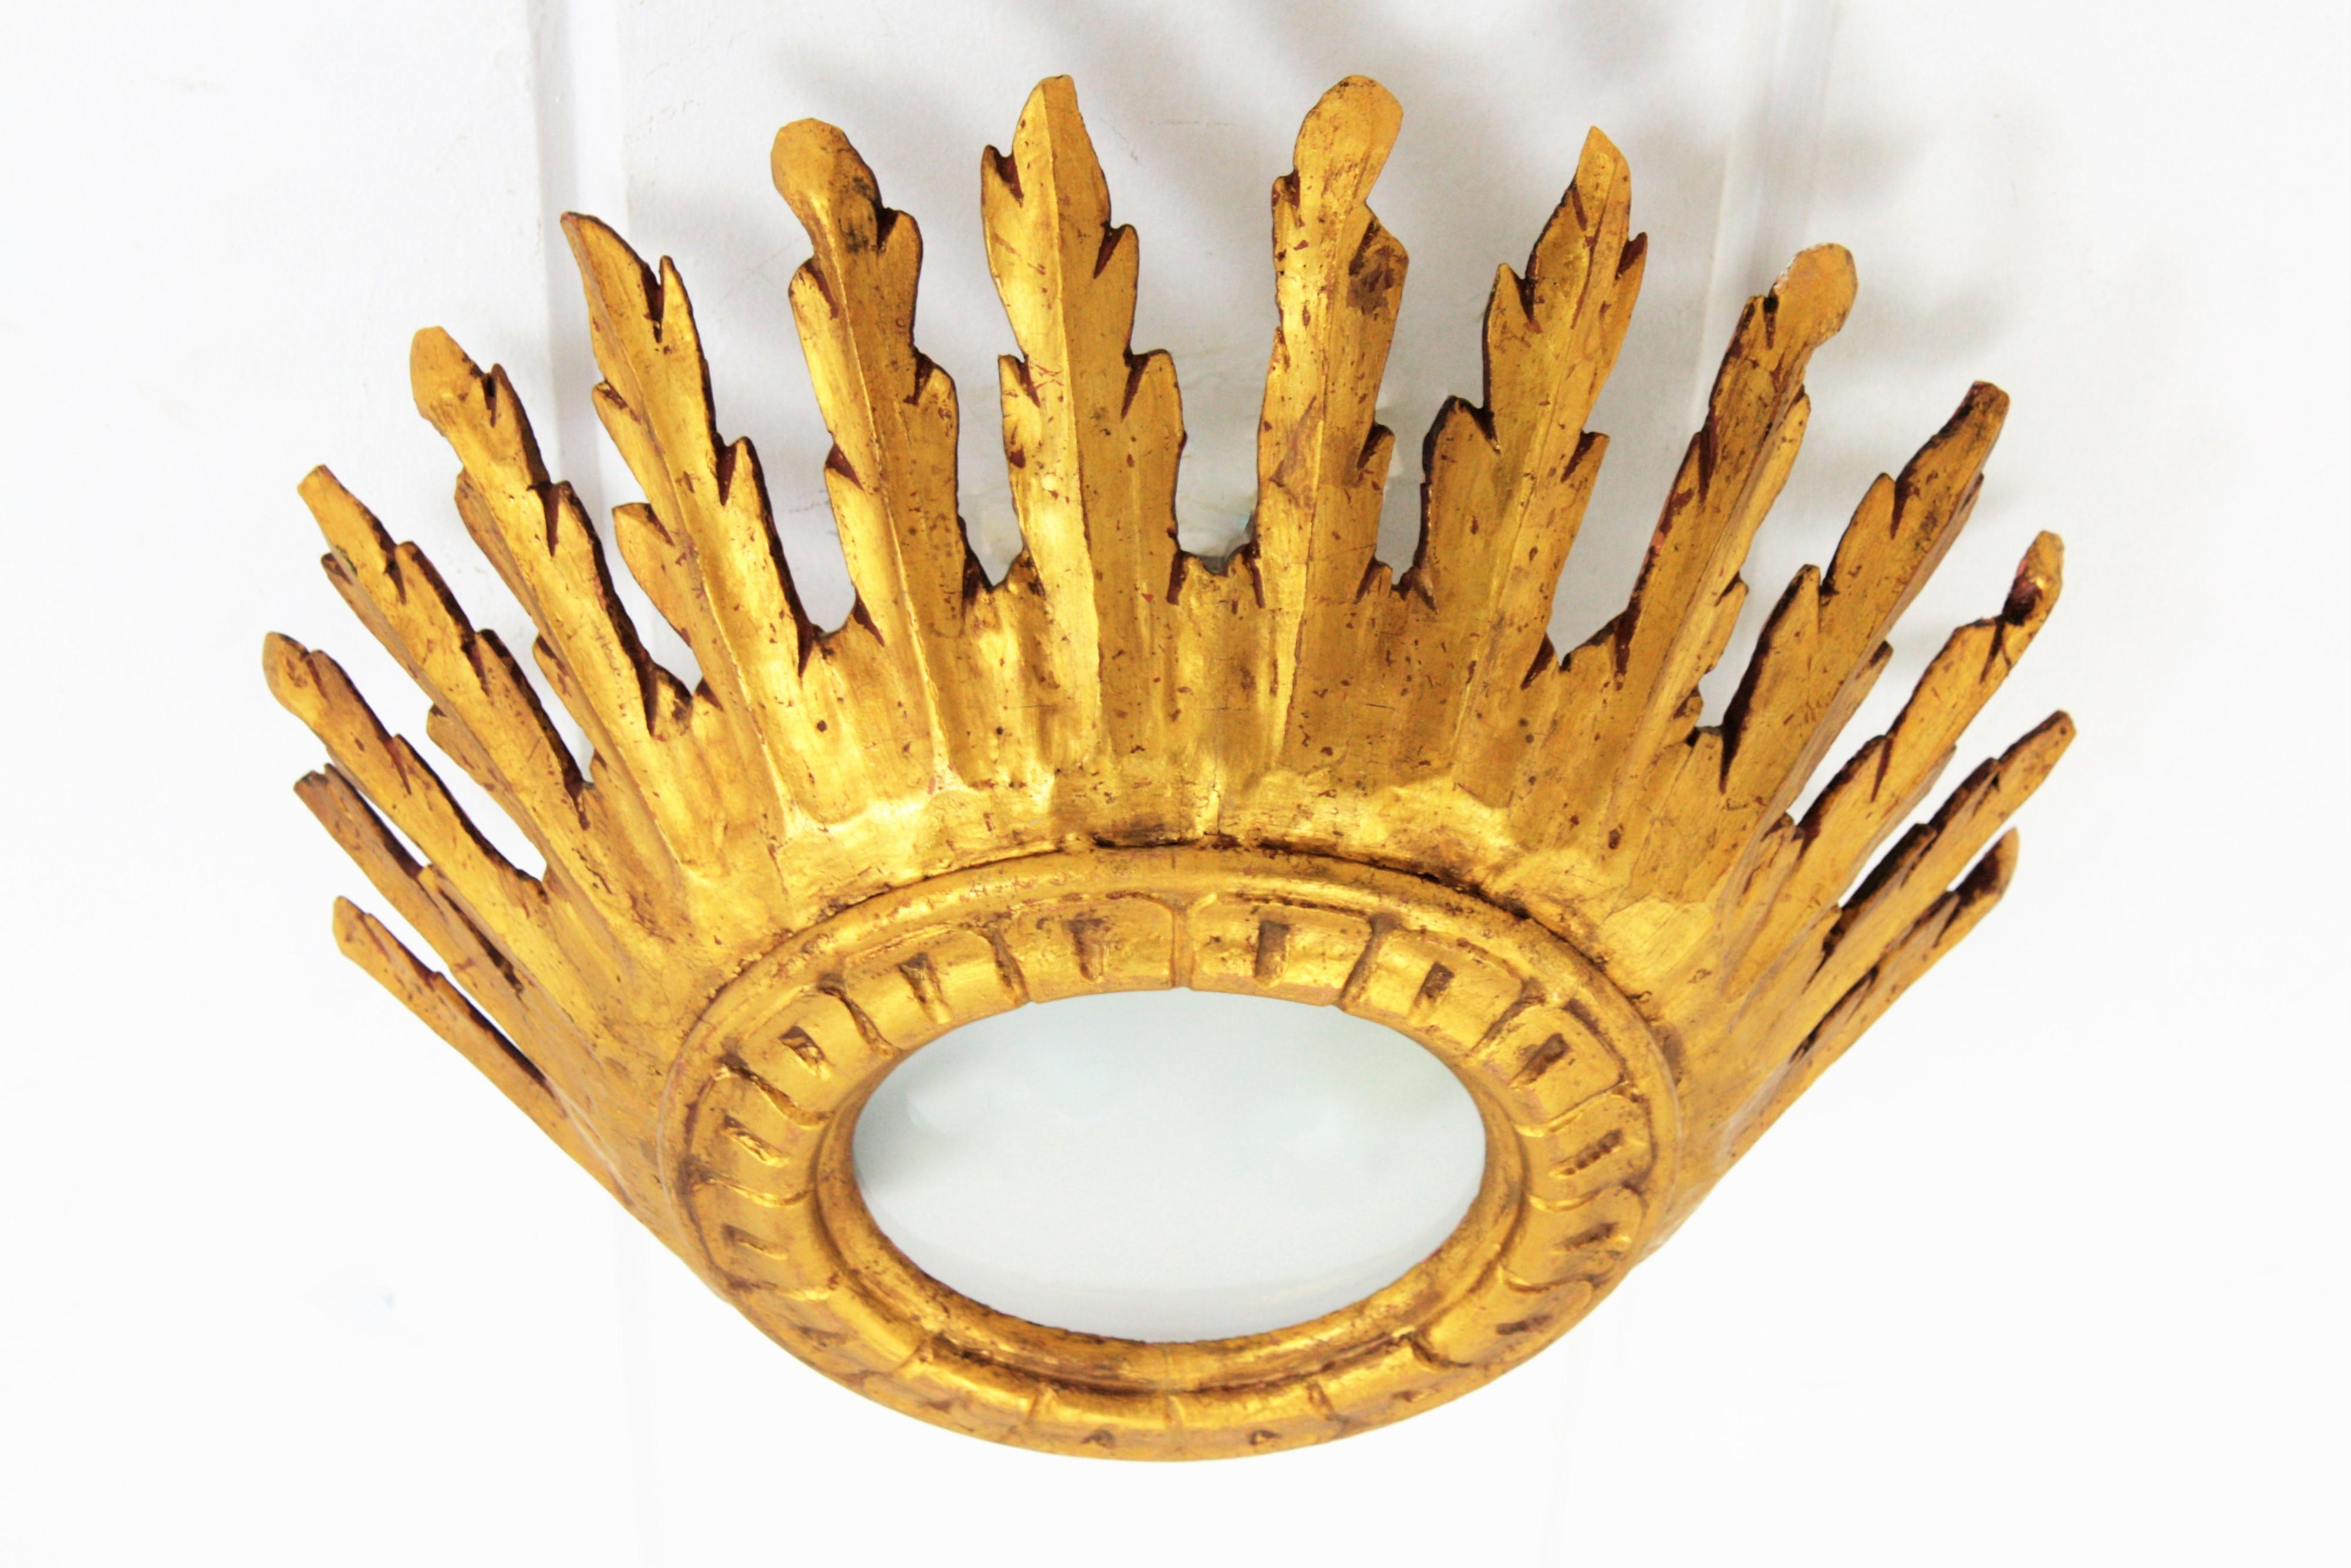 Spanish Baroque Giltwood Crown Sunburst Ceiling Light Fixture with Frosted Glass (20. Jahrhundert)